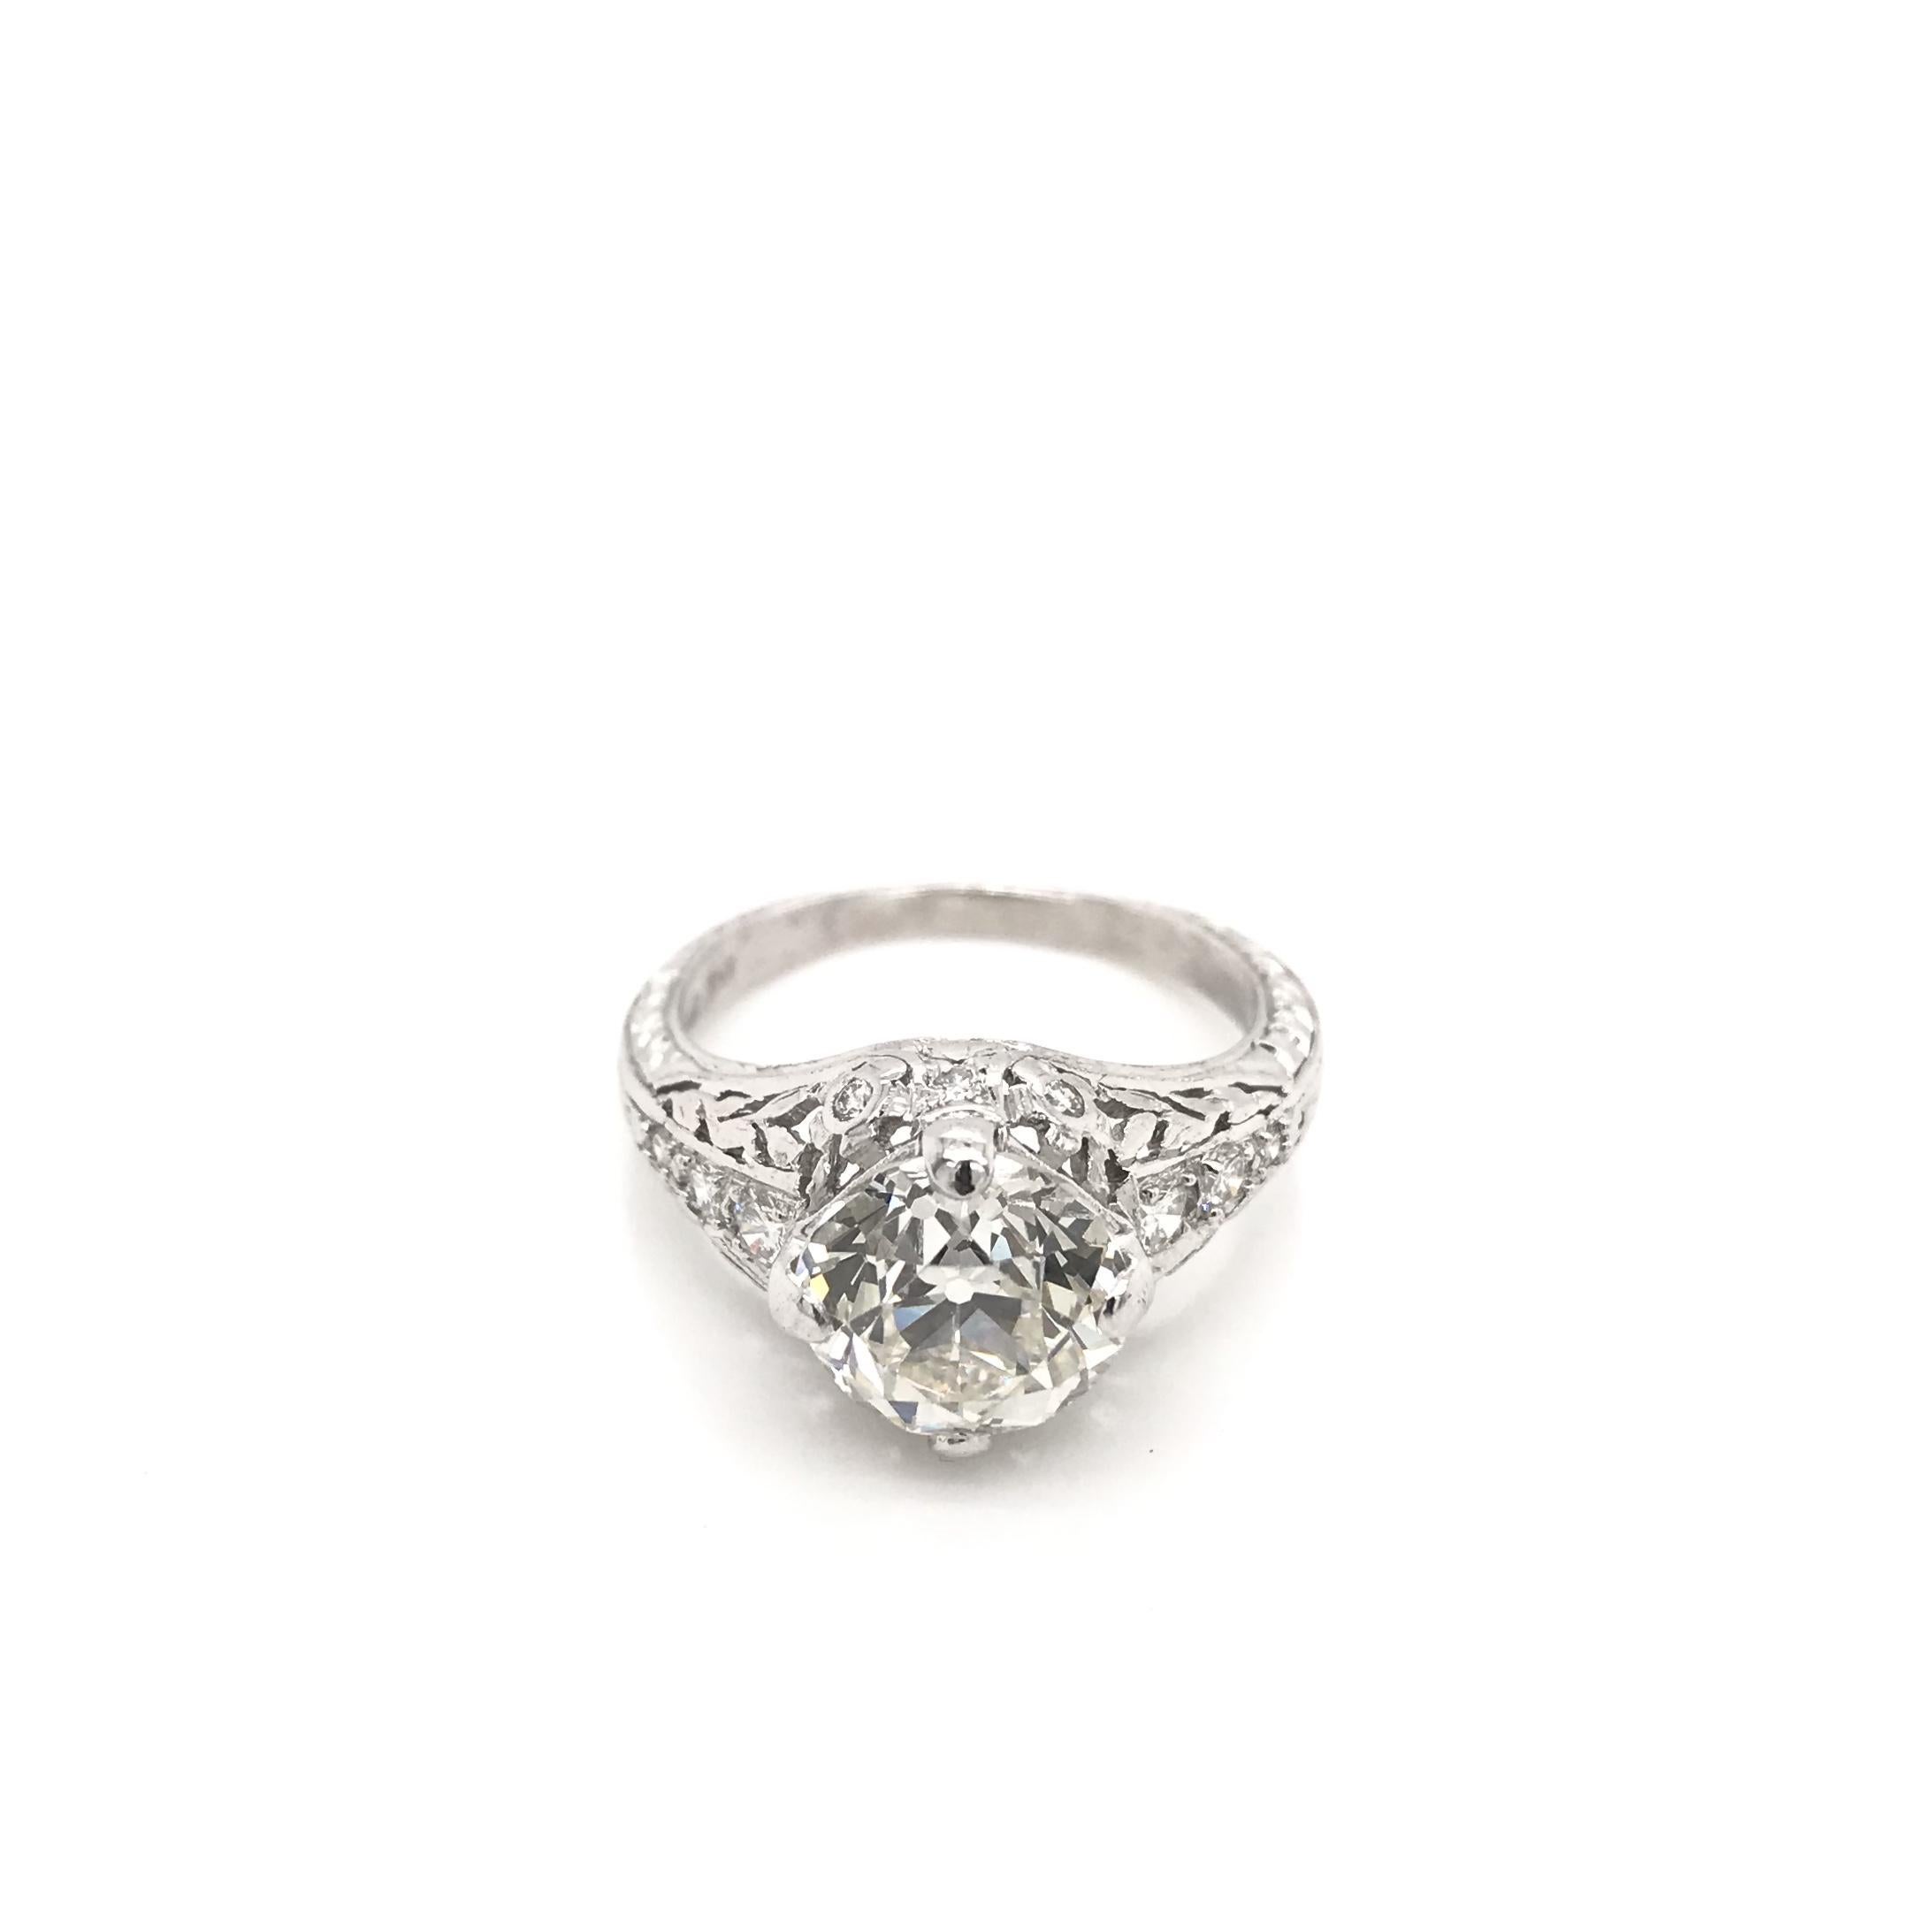 This contemporary estate filigree ring features a center diamond measuring approximately 2.75 carats. The center diamond is an antique Old European cut that has been certified by the Gemological Institute of America. The diamond grades approximately